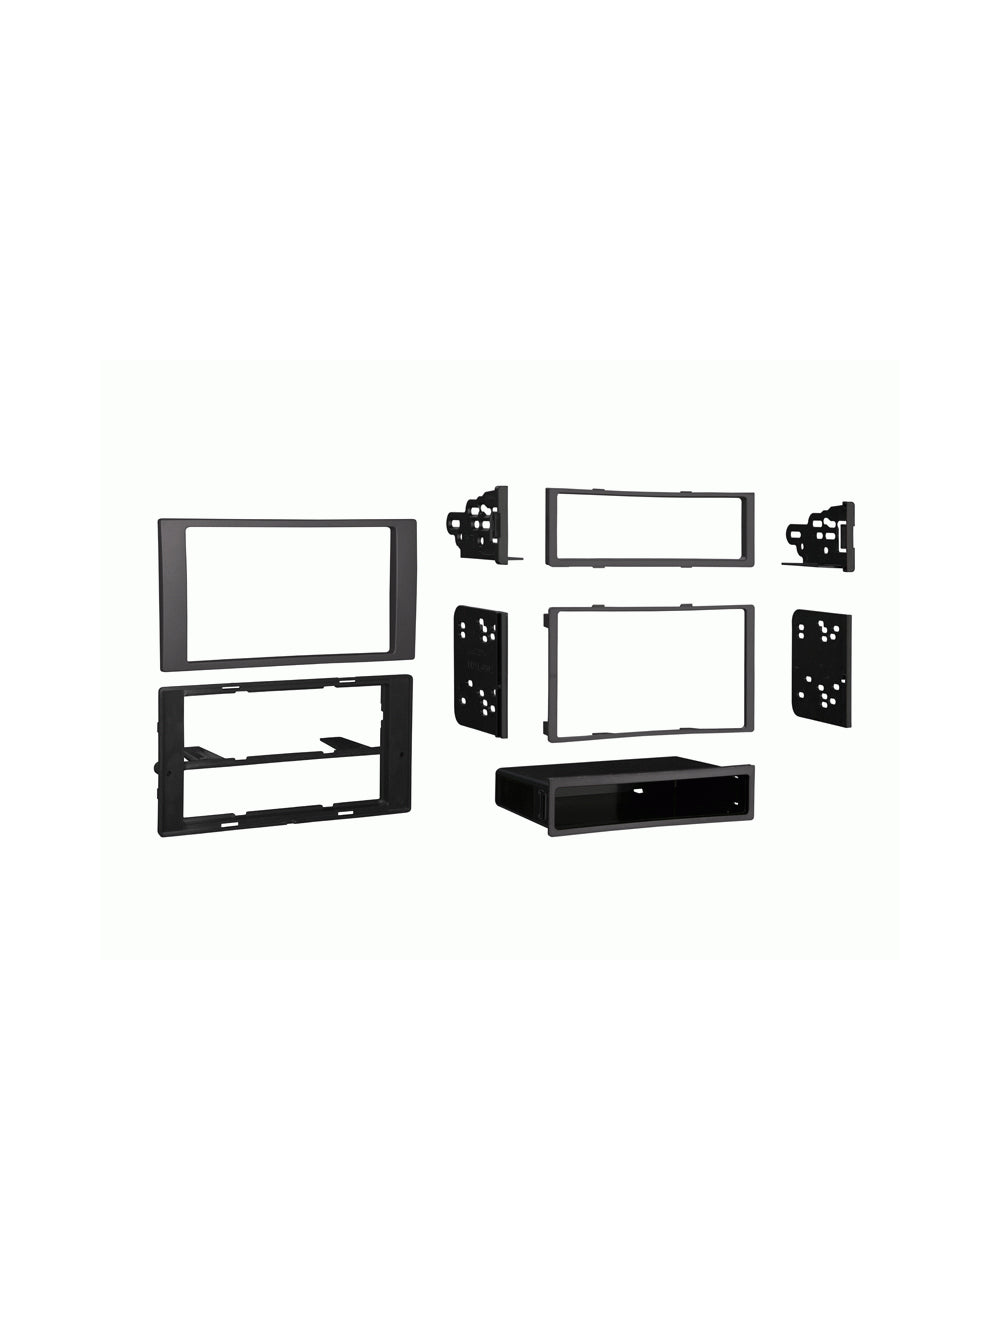 Metra 99-5824CH Single/Double DIN Dash Installation Kit for 2010-2012 Ford Transit Vehicles Charcoal